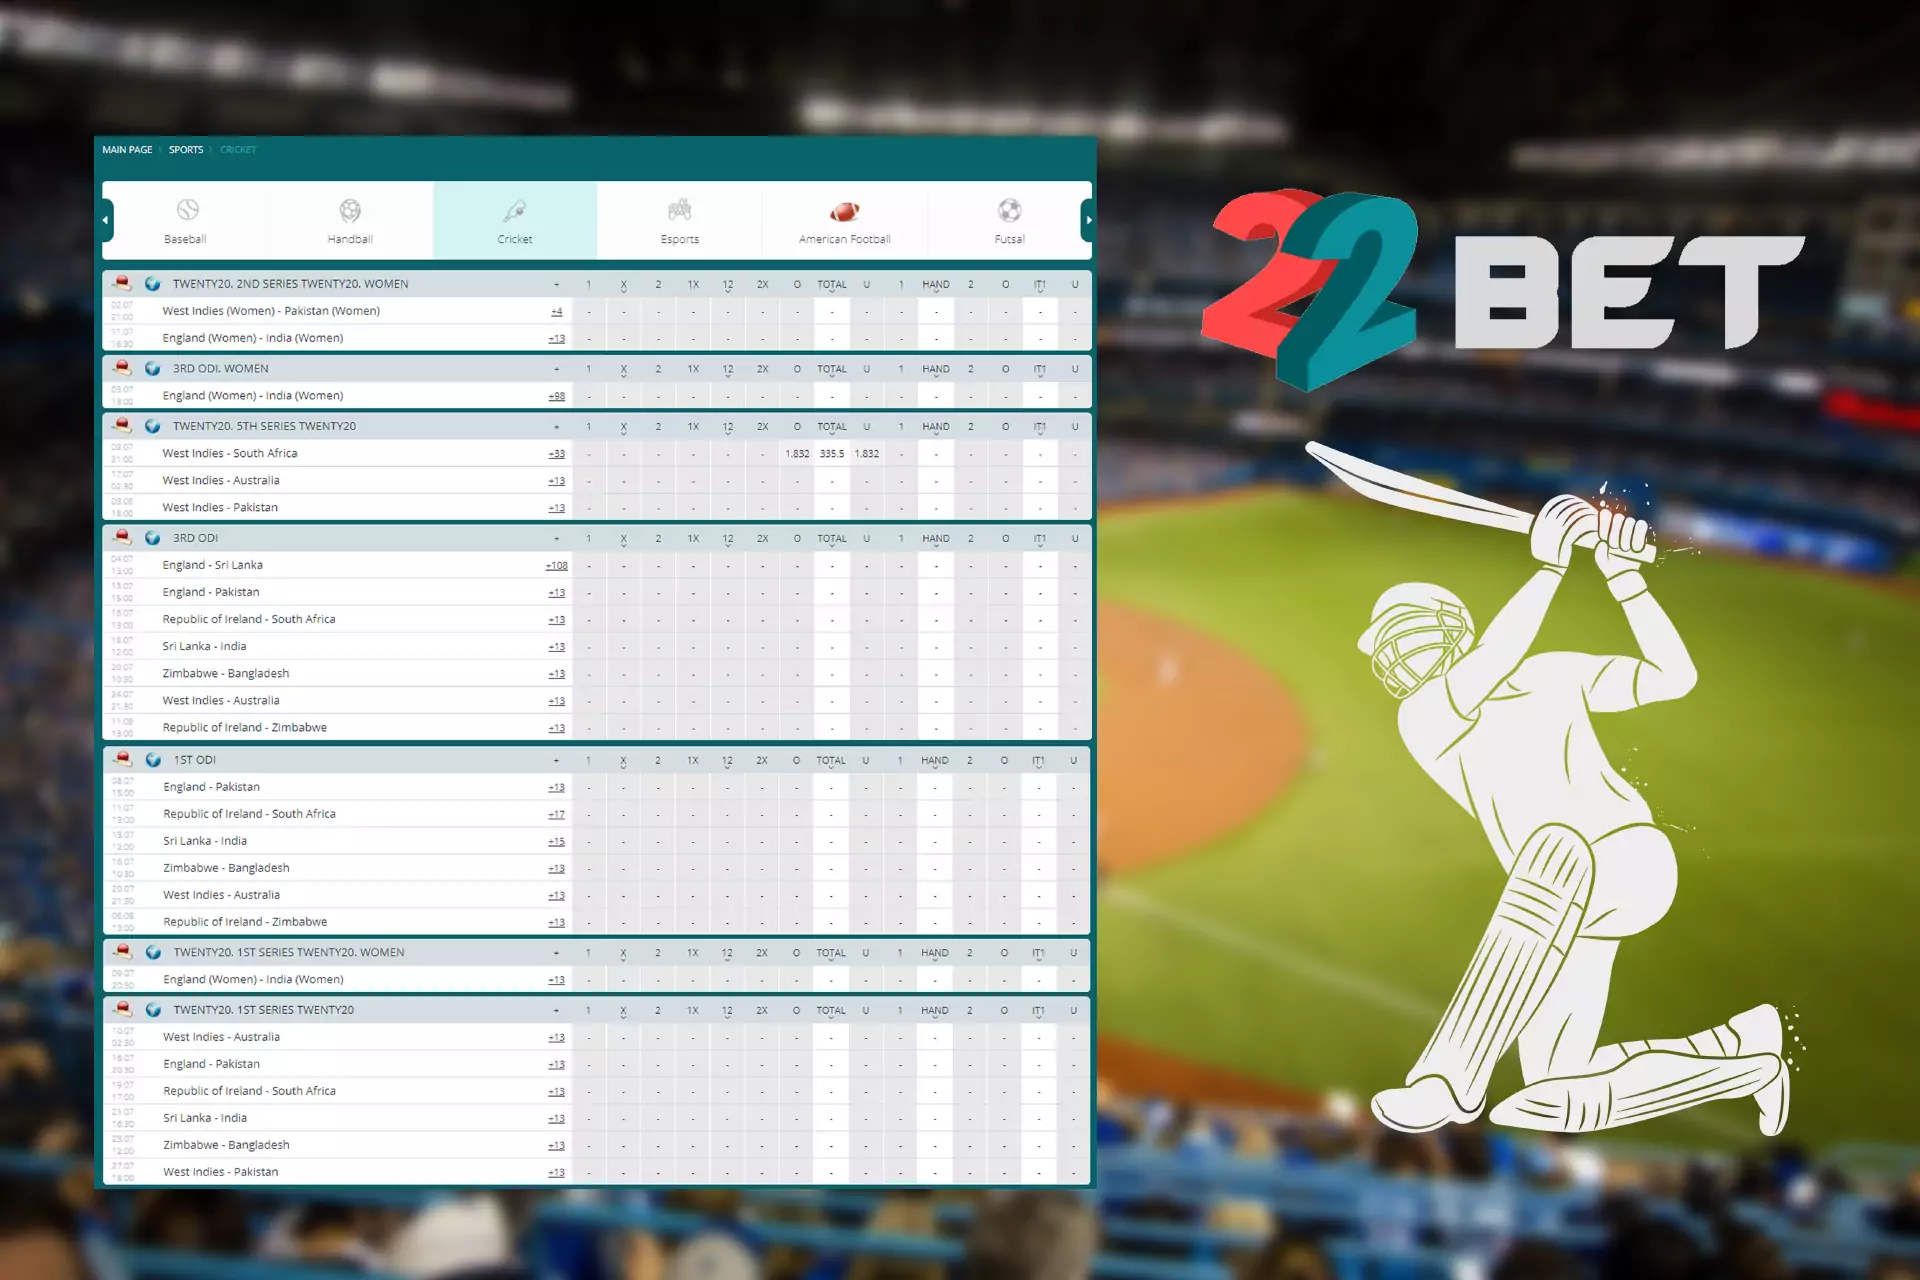 The 22bet focuses on cricket and other popular sorts of sports.